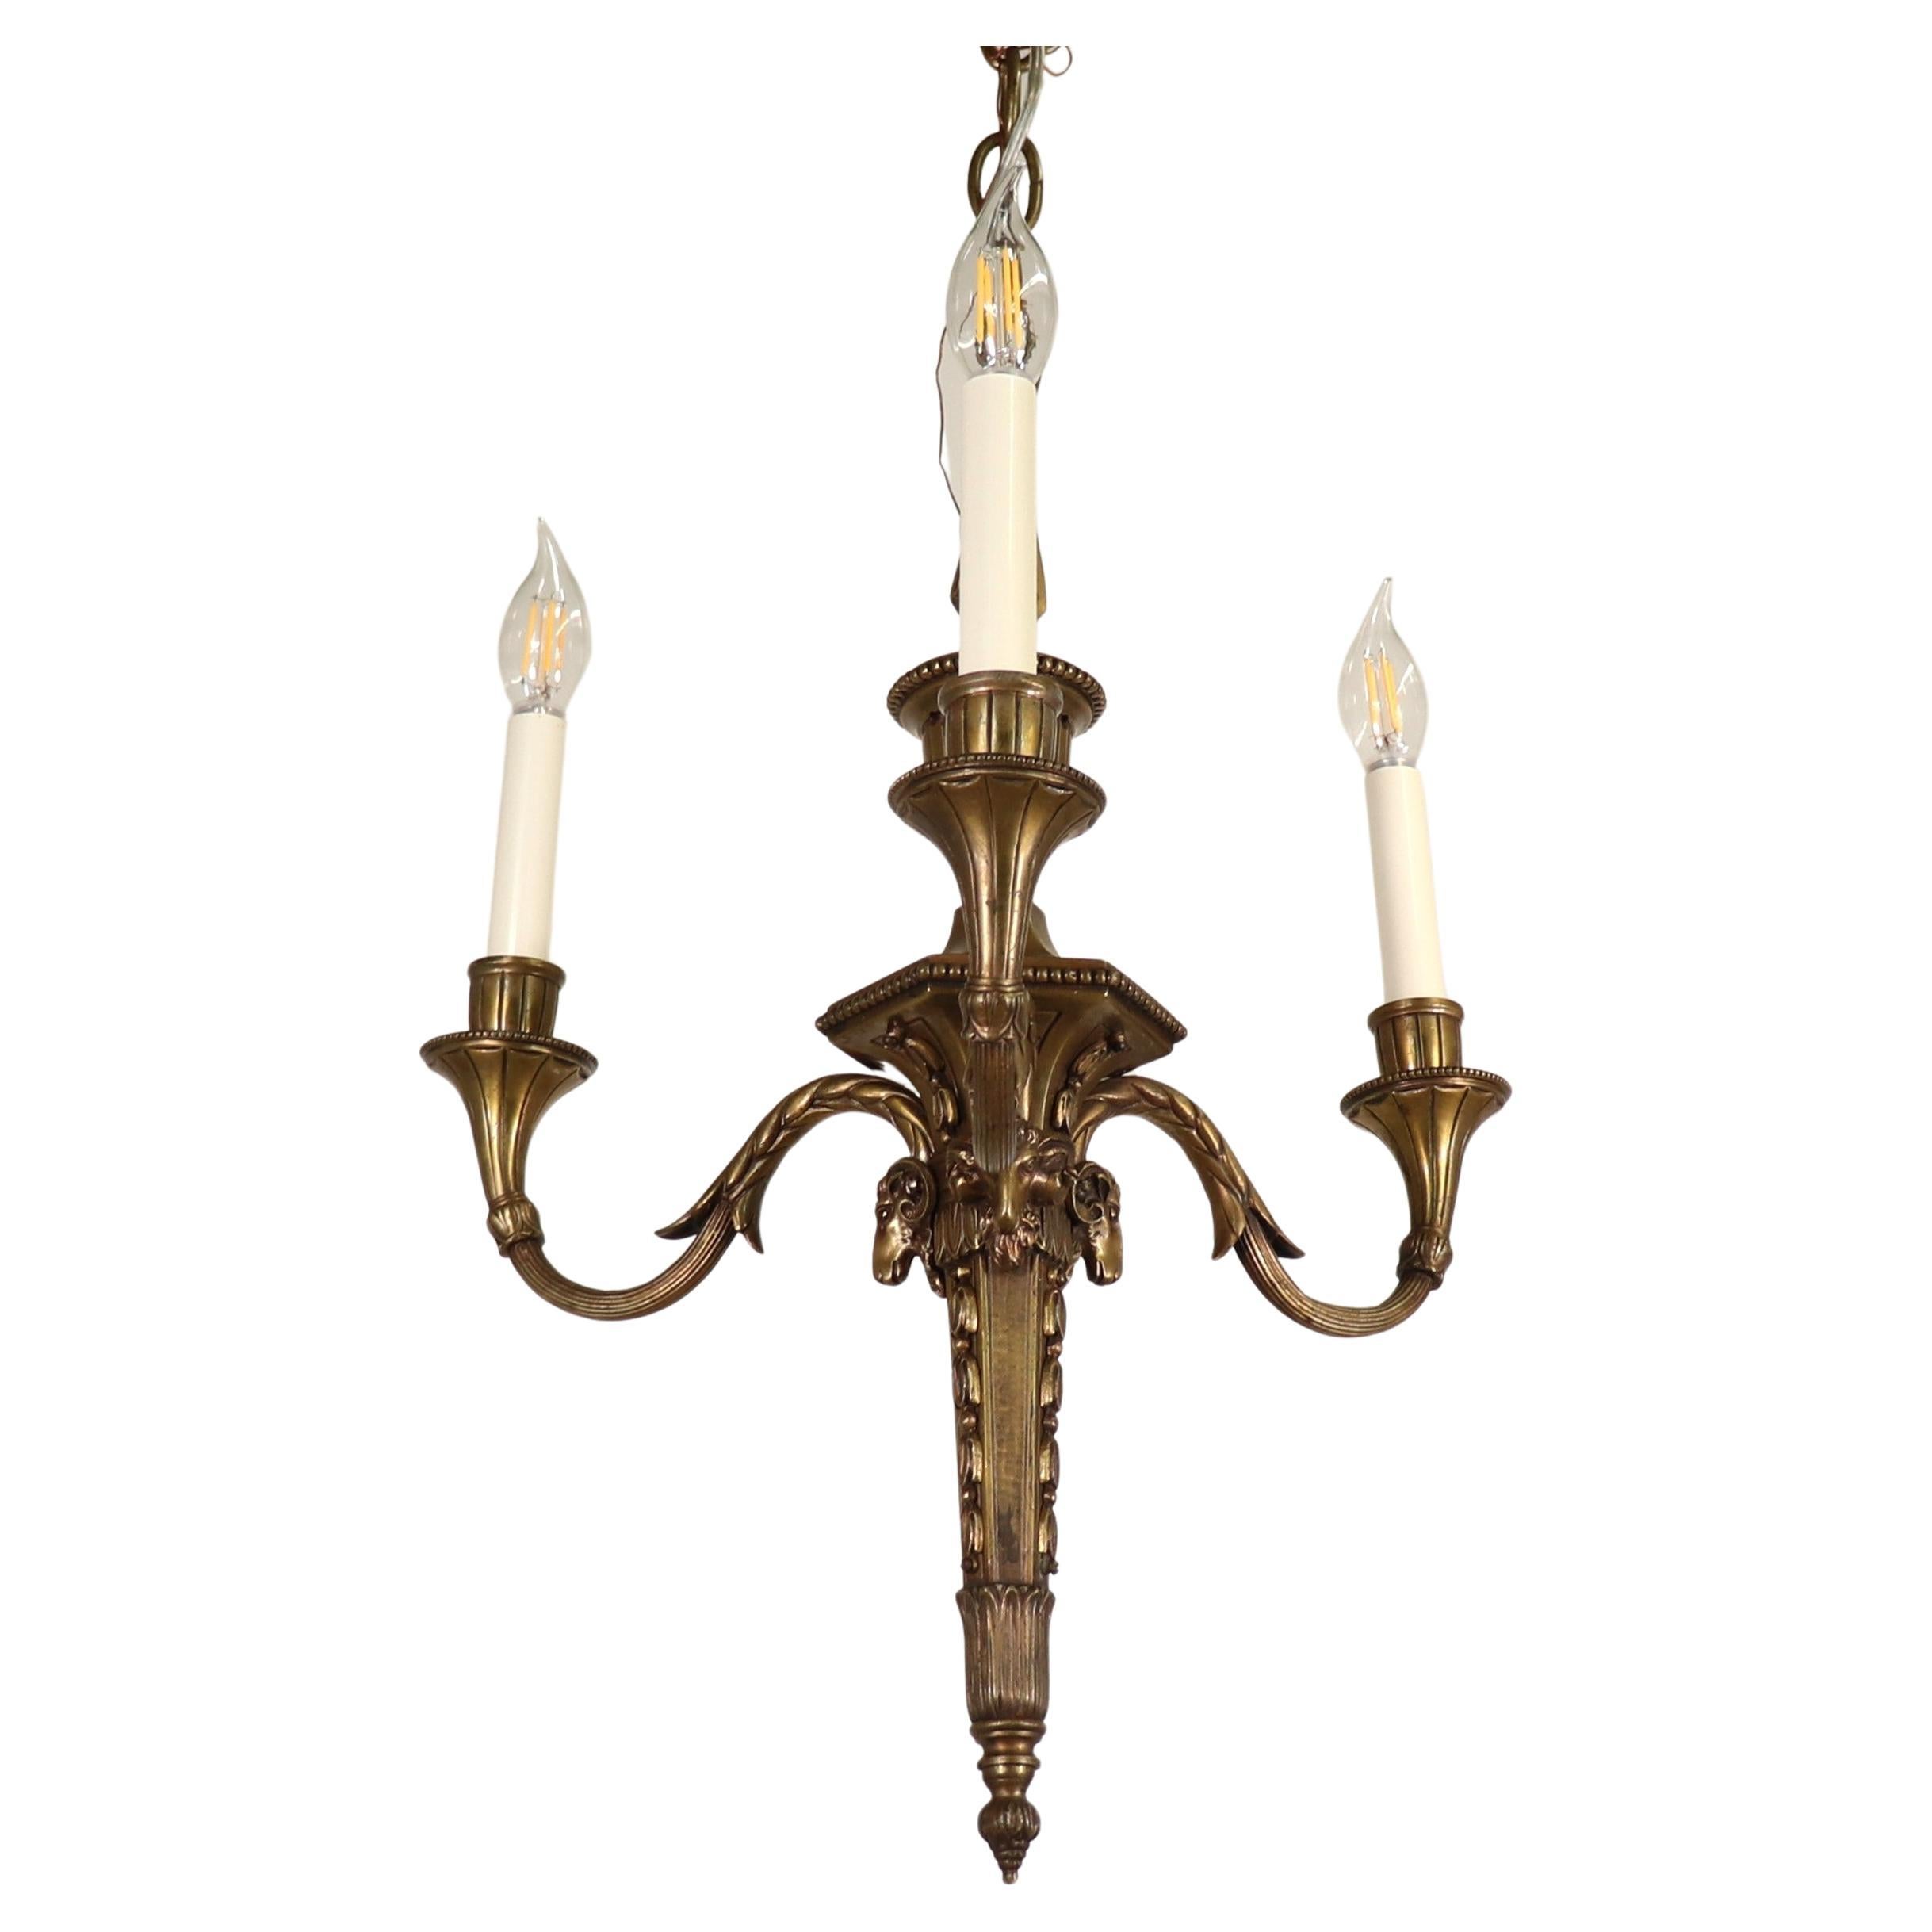 19th Century French Louis XVI Style Neoclassical Bronze Flambeau Chandelier For Sale